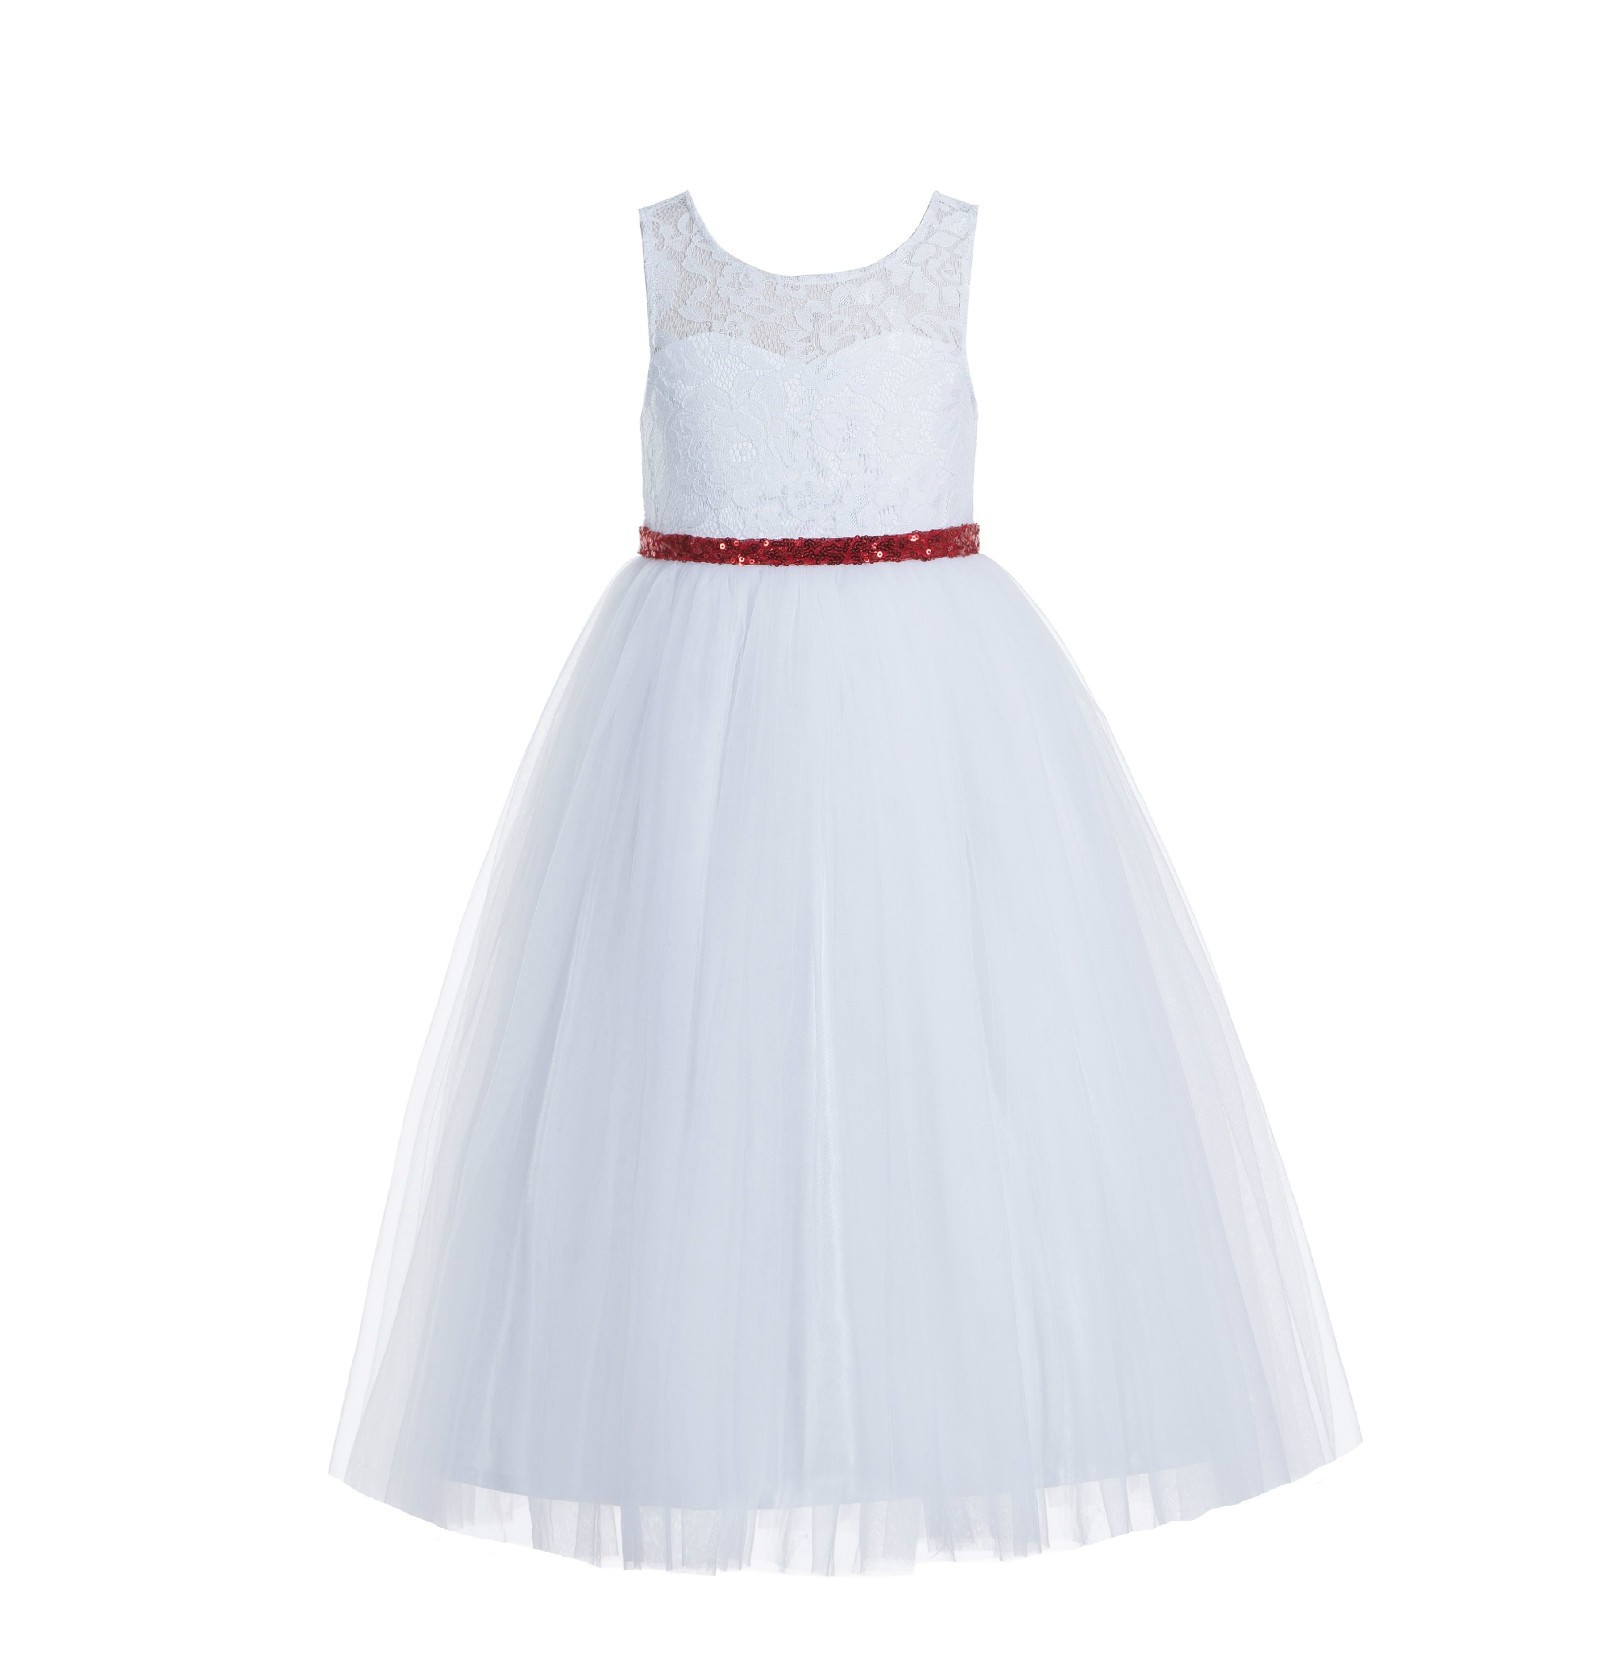 White / Red Lace Tulle Scoop Neck Keyhole Back A-Line Flower Girl Dress 178